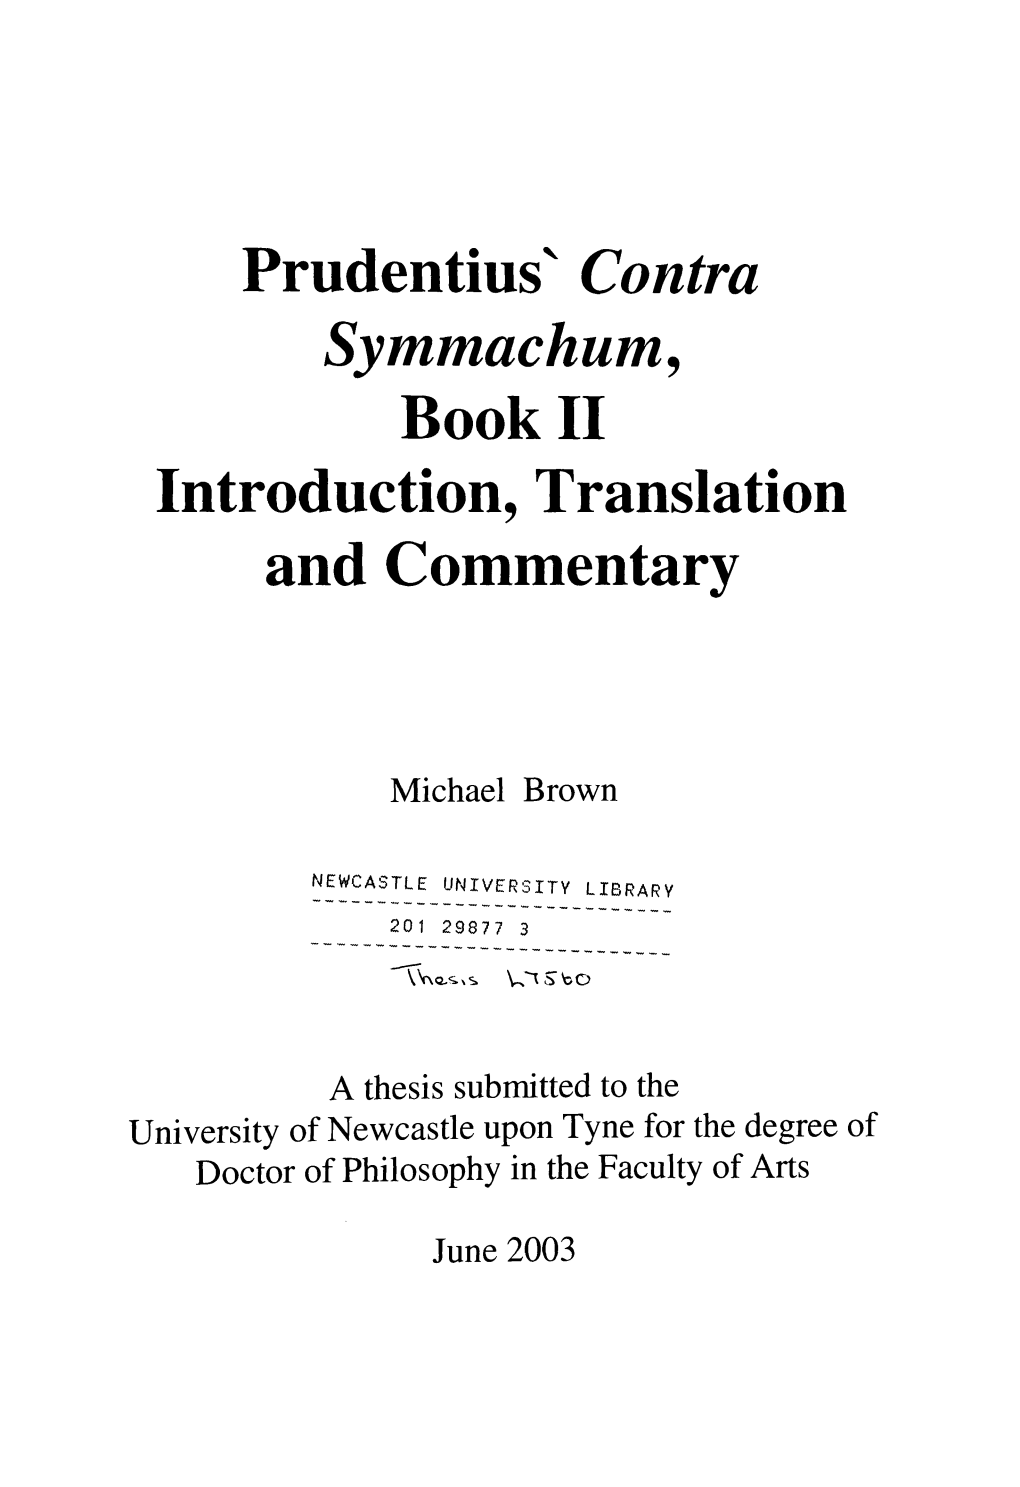 Prudentius' Contra Symmachum, Book II Introduction, Translation and Commentary